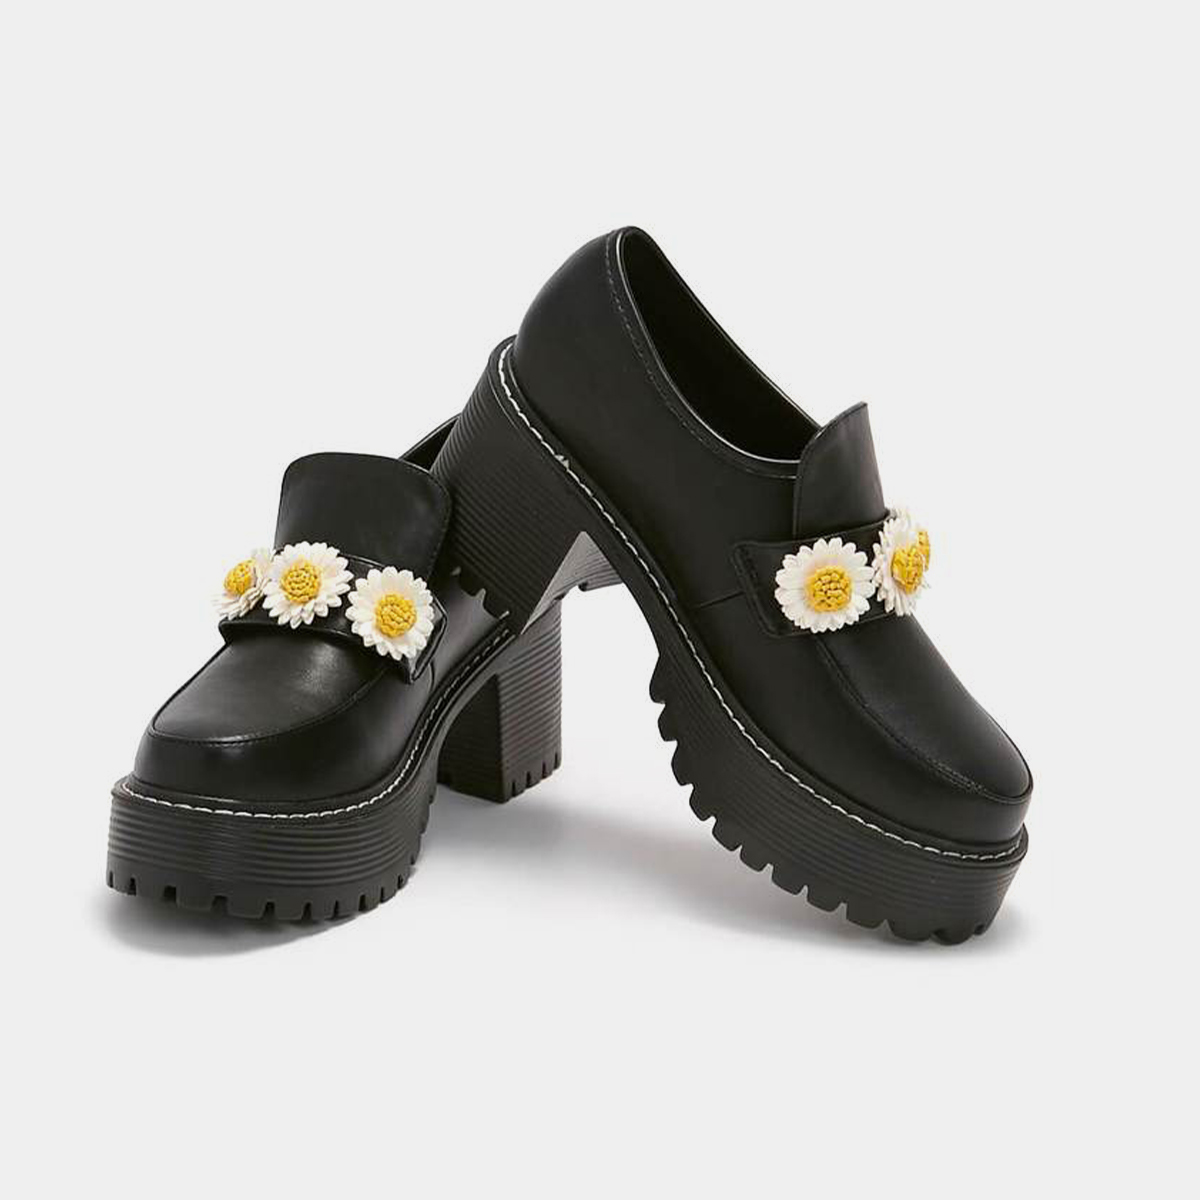 JADE HARLEY and our PRIMROSE Flower Chunky Shoes are perfect for this gardenGnostic girl SHOP  https://bit.ly/3k6hVm6 CREDIT:  https://vsbattles.fandom.com/wiki/Jade_Harley